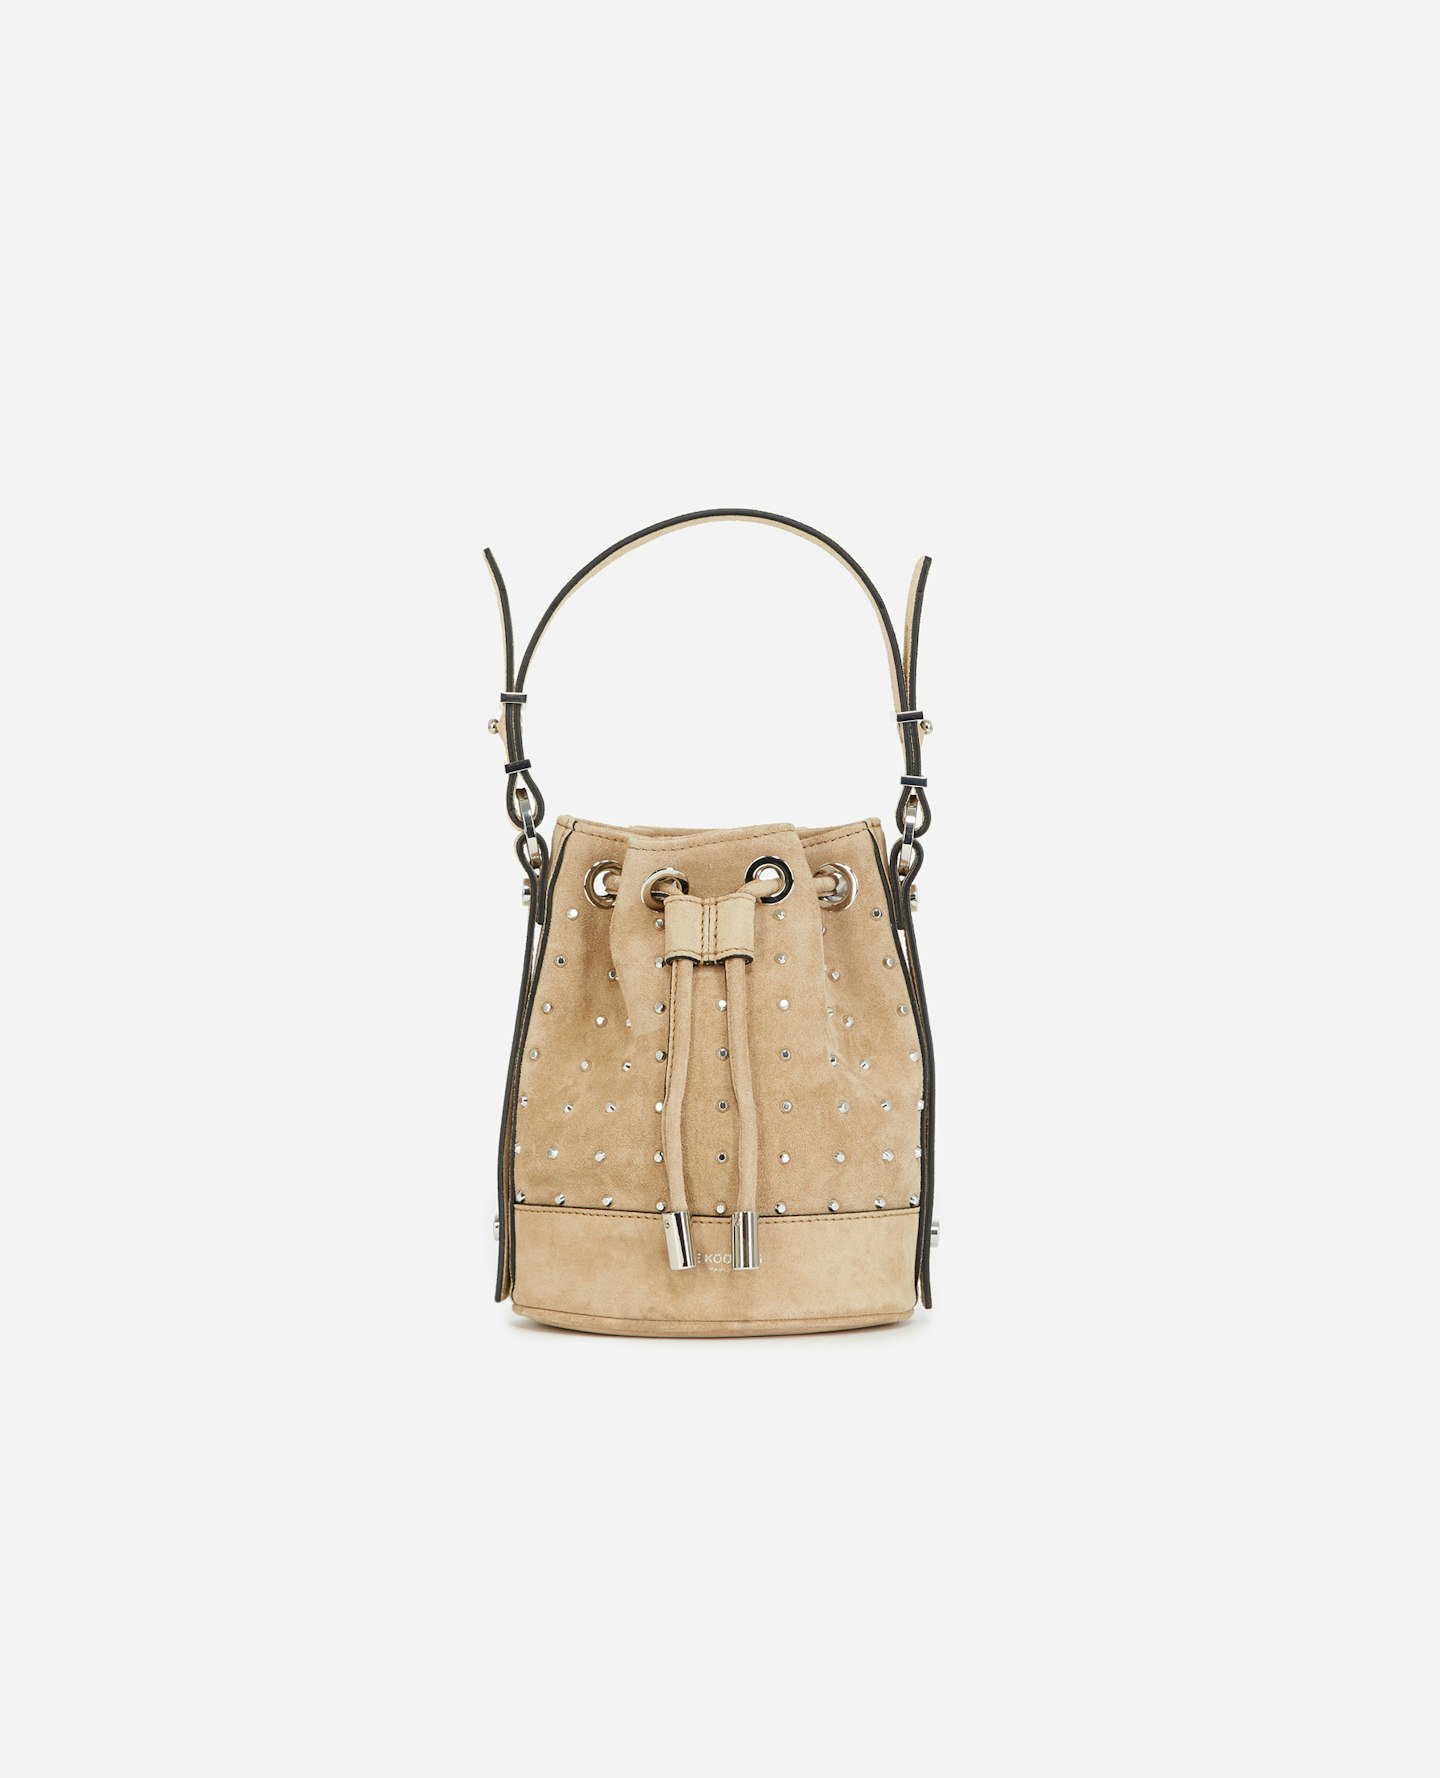 The Kooples, Studded Nano Tina Bag In Beige Suede, £280